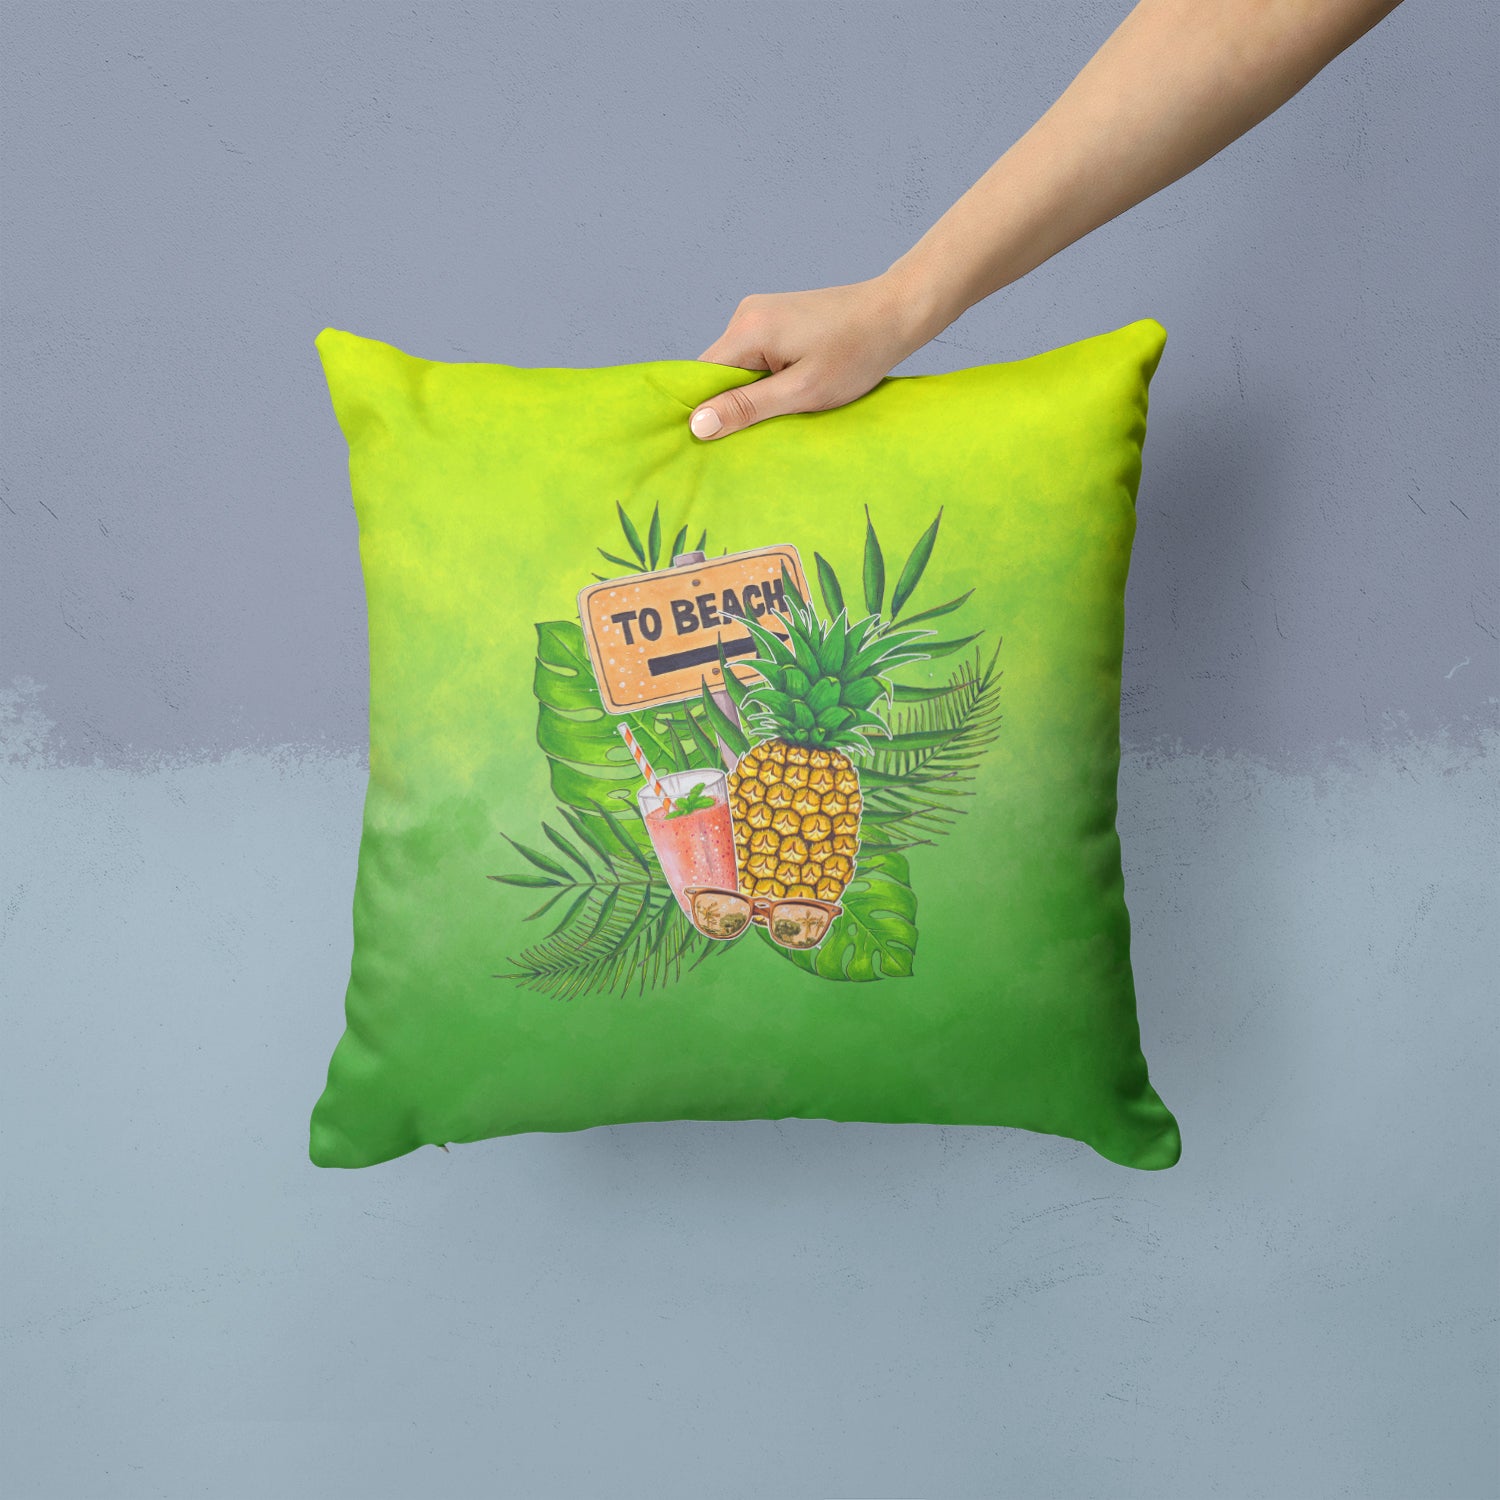 To the Beach Summer Fabric Decorative Pillow BB7450PW1414 - the-store.com